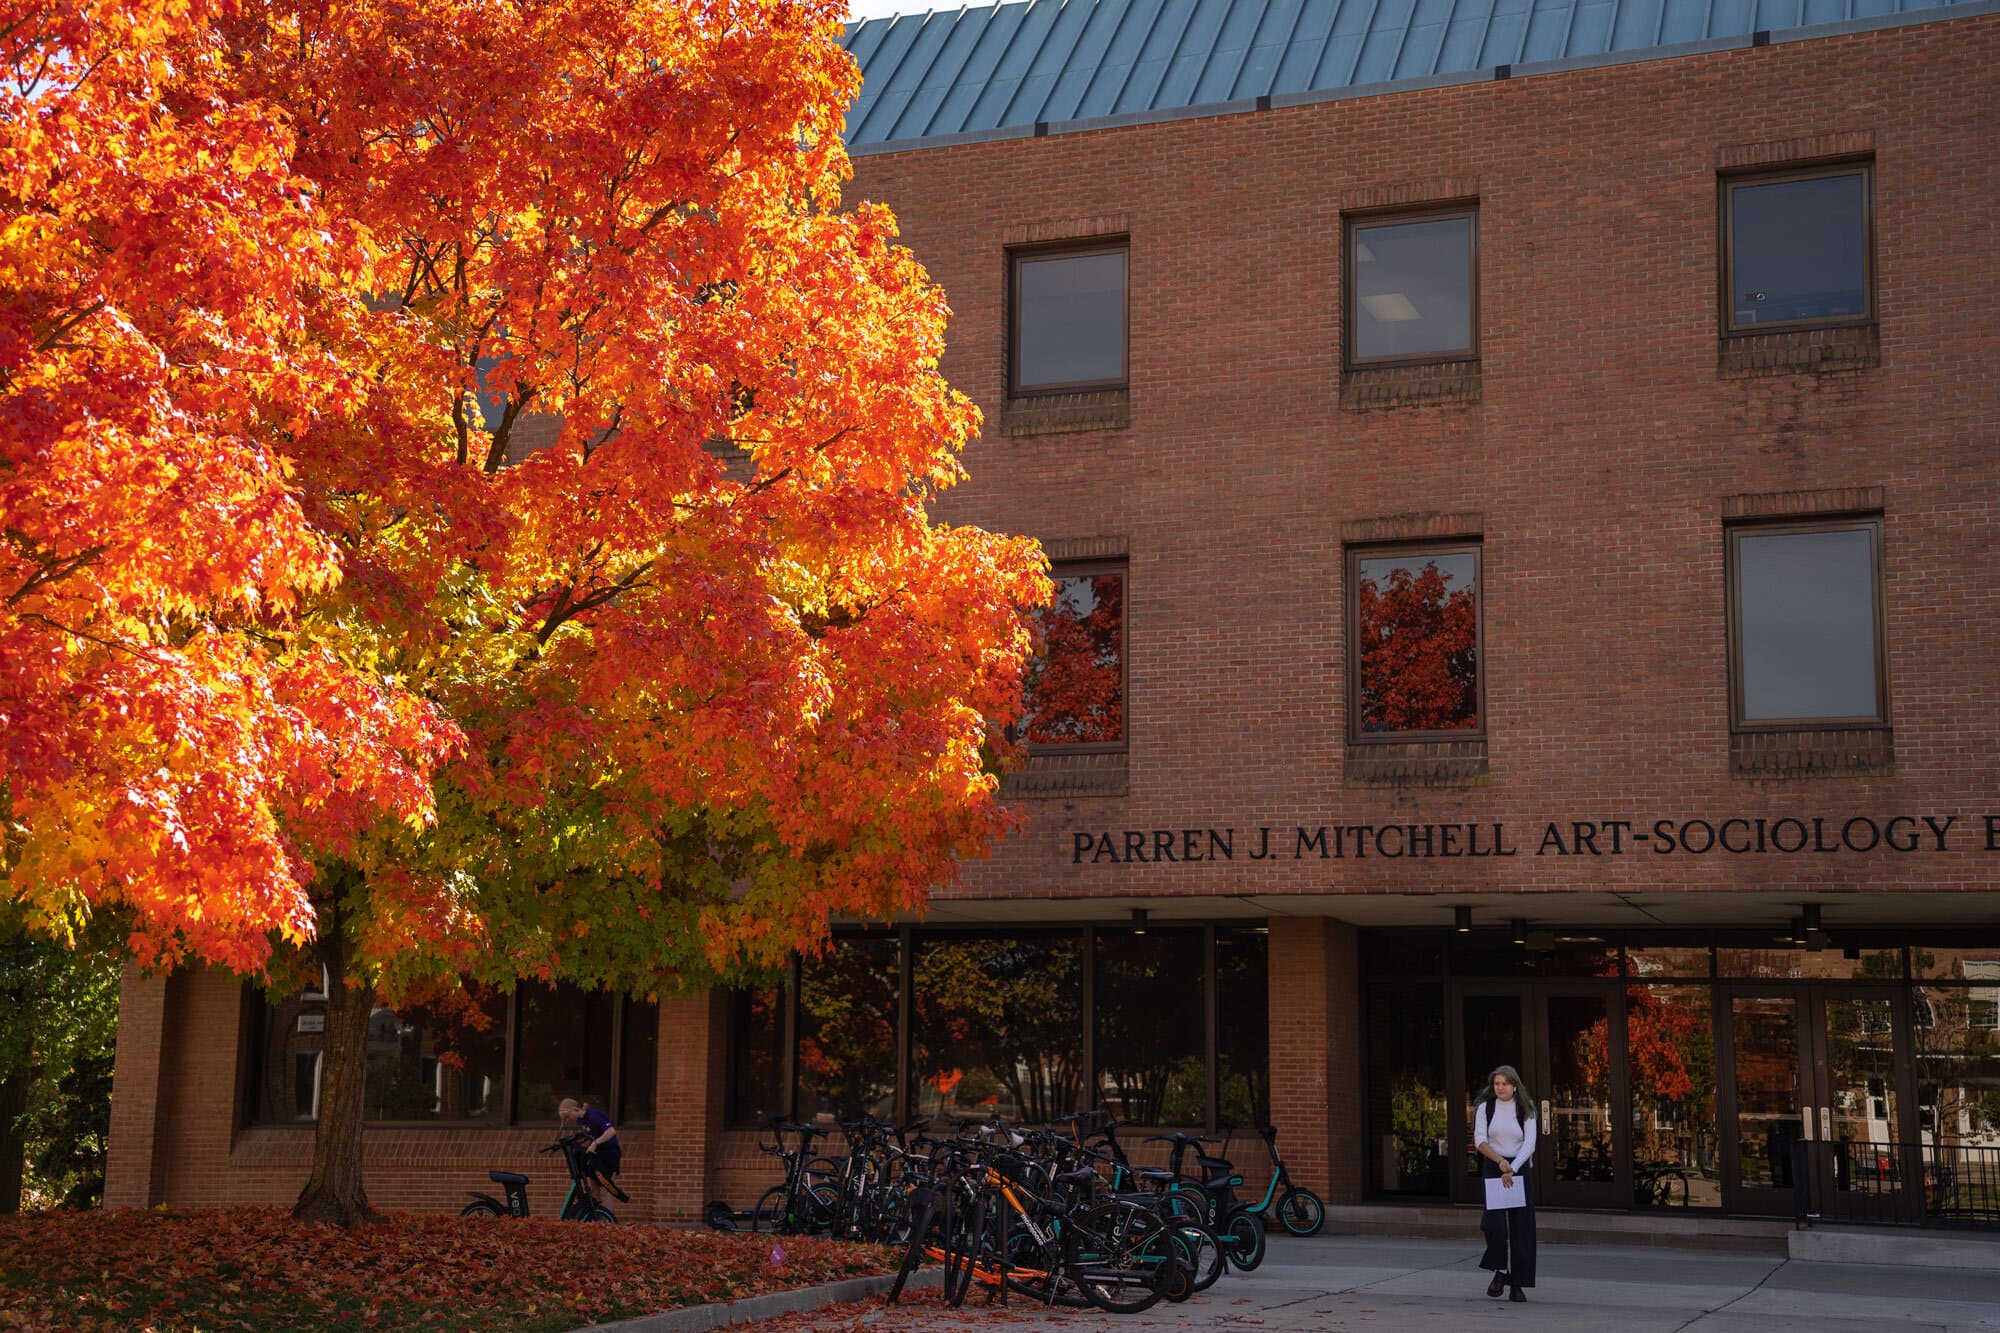 a bright orange tree by the art-sociology building